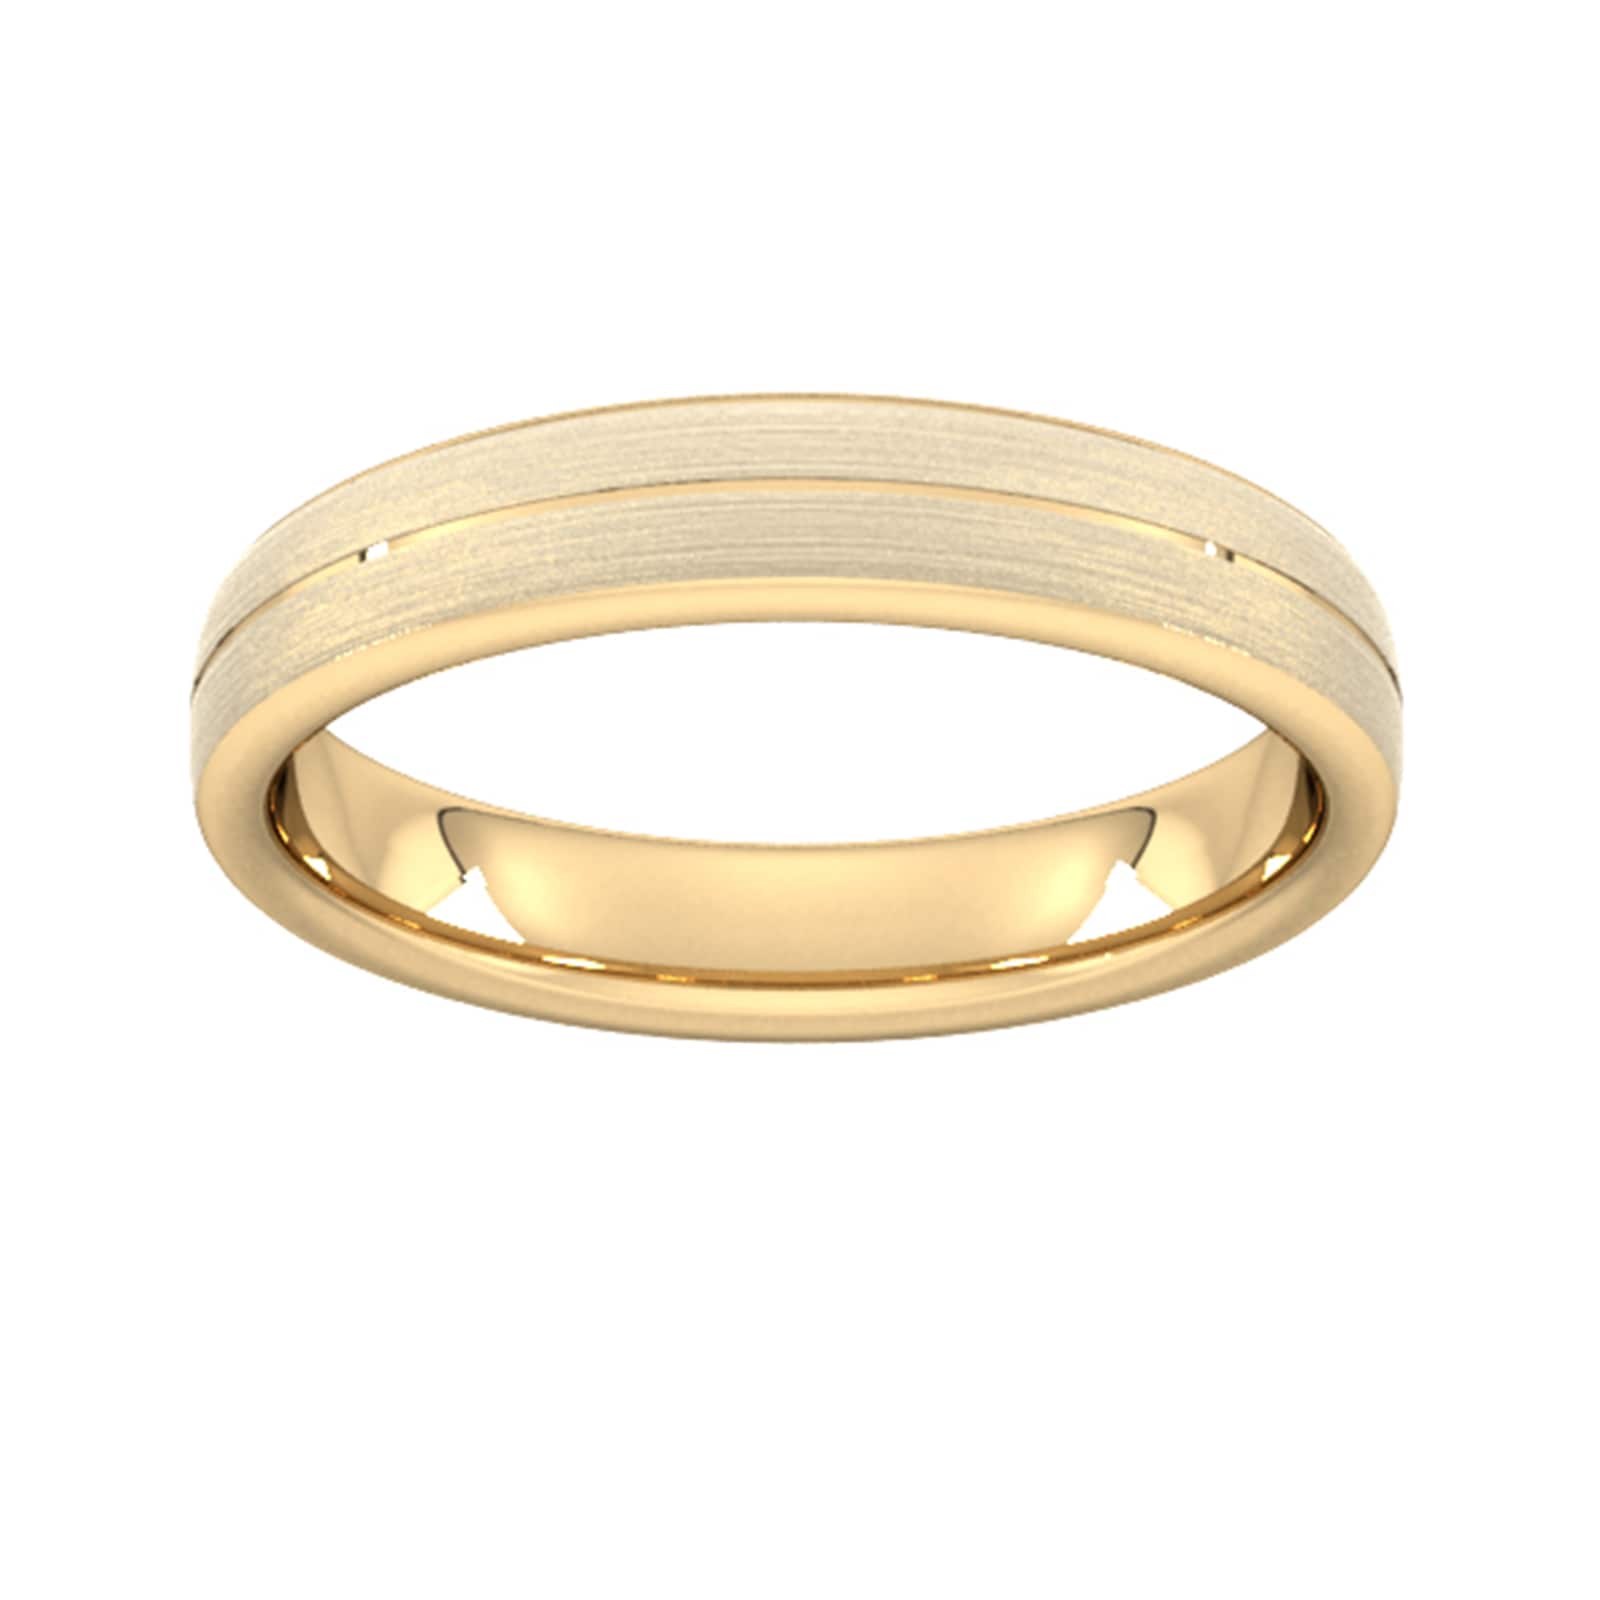 4mm Traditional Court Heavy Centre Groove With Chamfered Edge Wedding Ring In 18 Carat Yellow Gold - Ring Size W